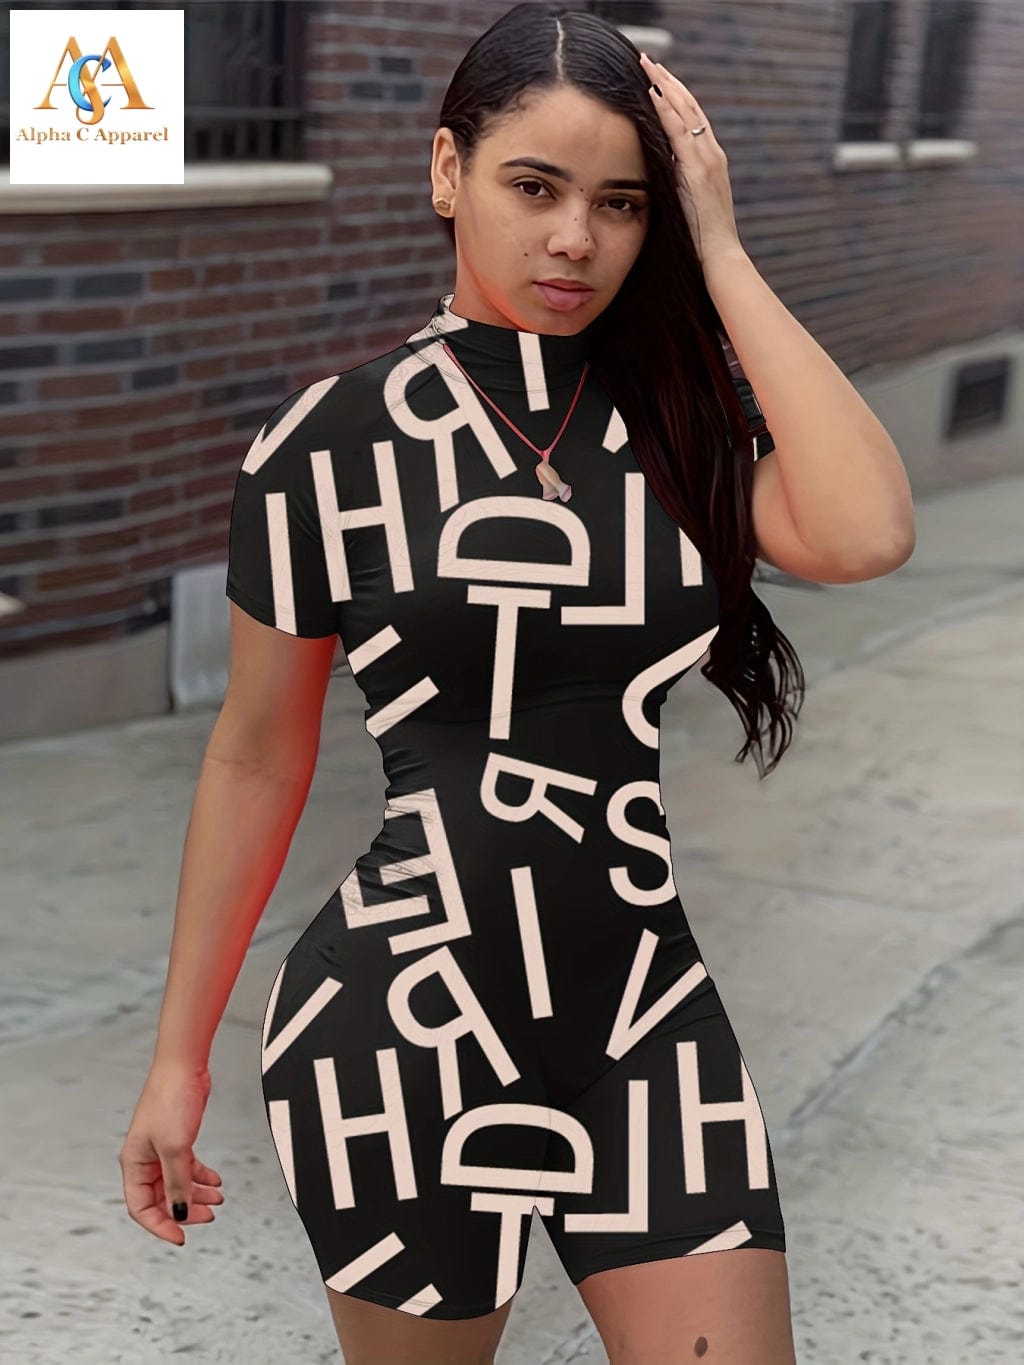 Alpha C Apparel Unleash Your Style with Graphic Print Rompers jumpsuit Alpha C Apparel